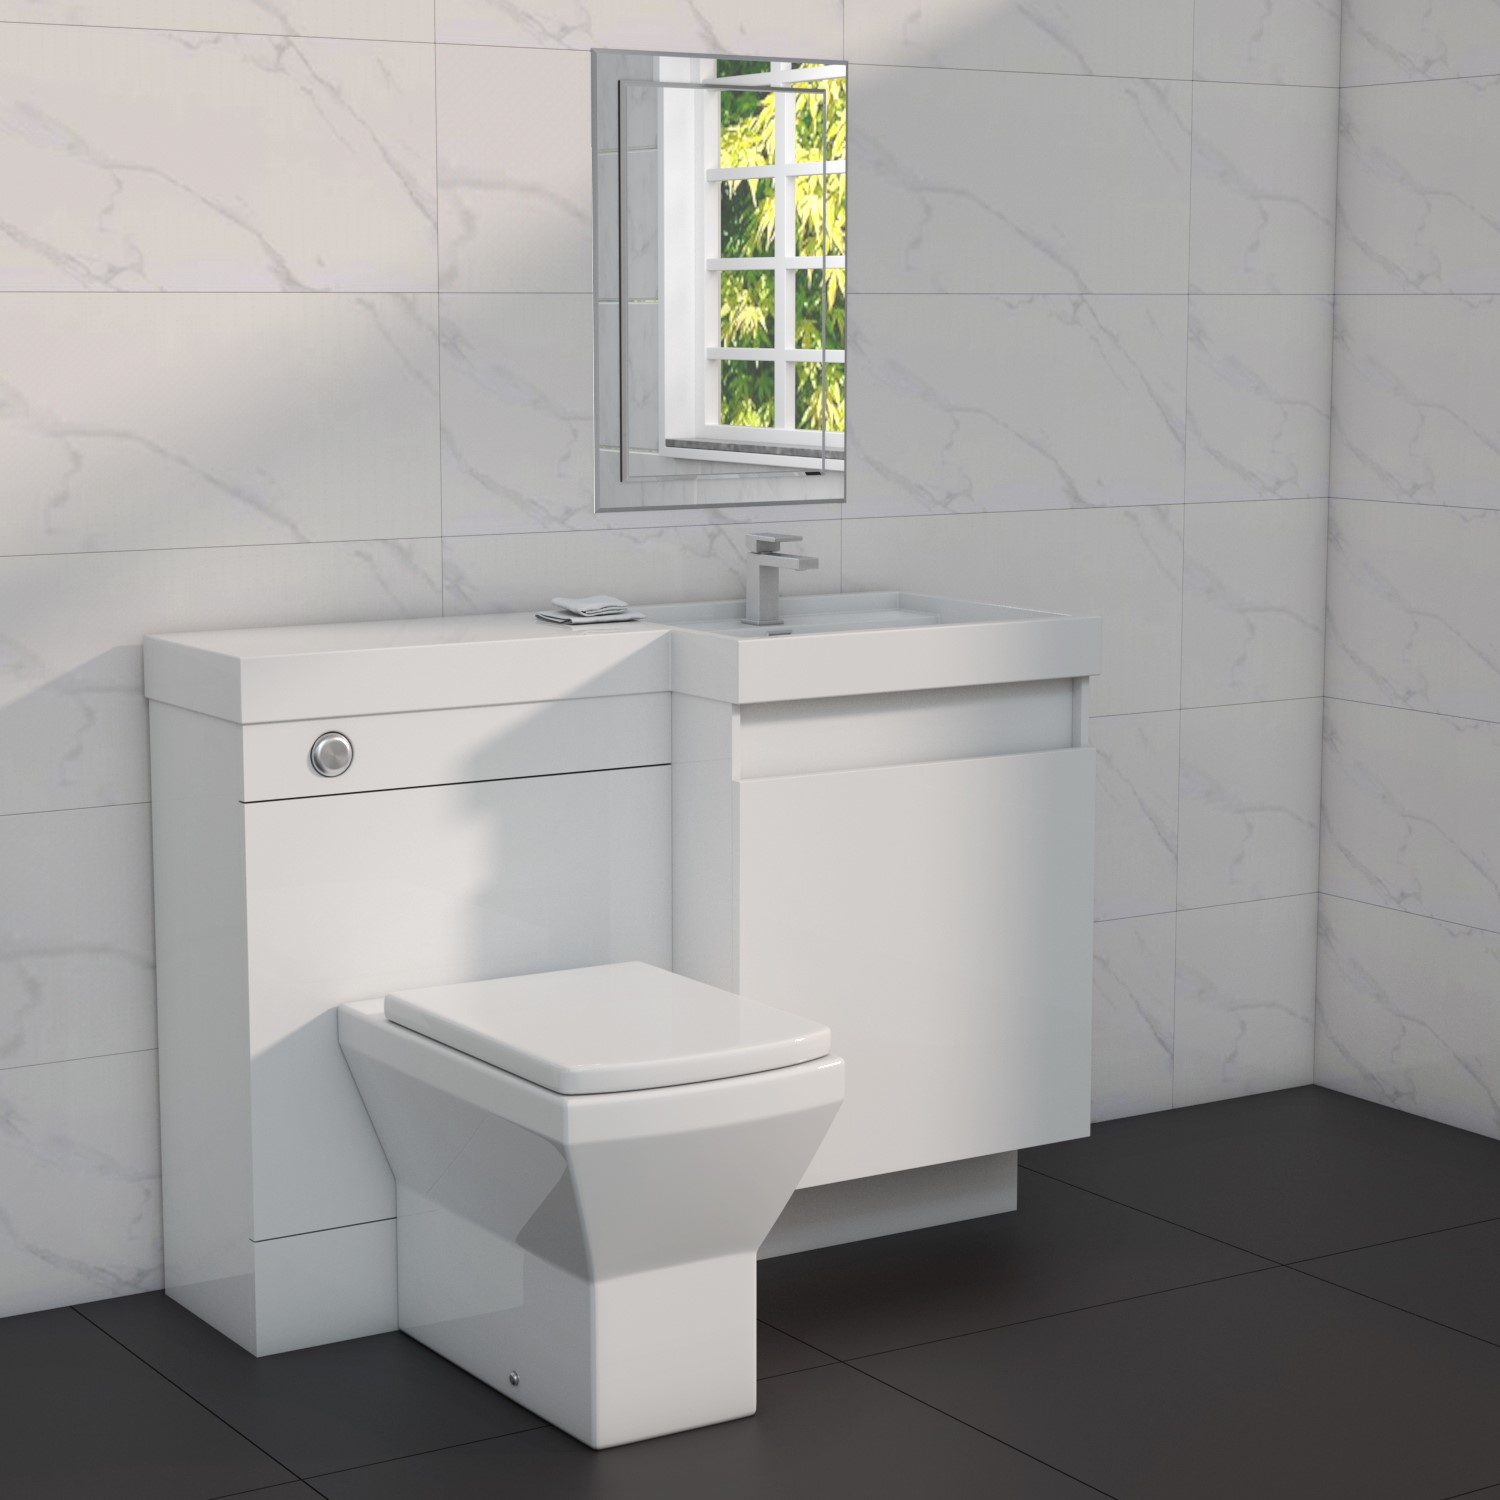 1200mm White Toilet And Sink Unit Right, Double Basin Vanity Unit With Toilet